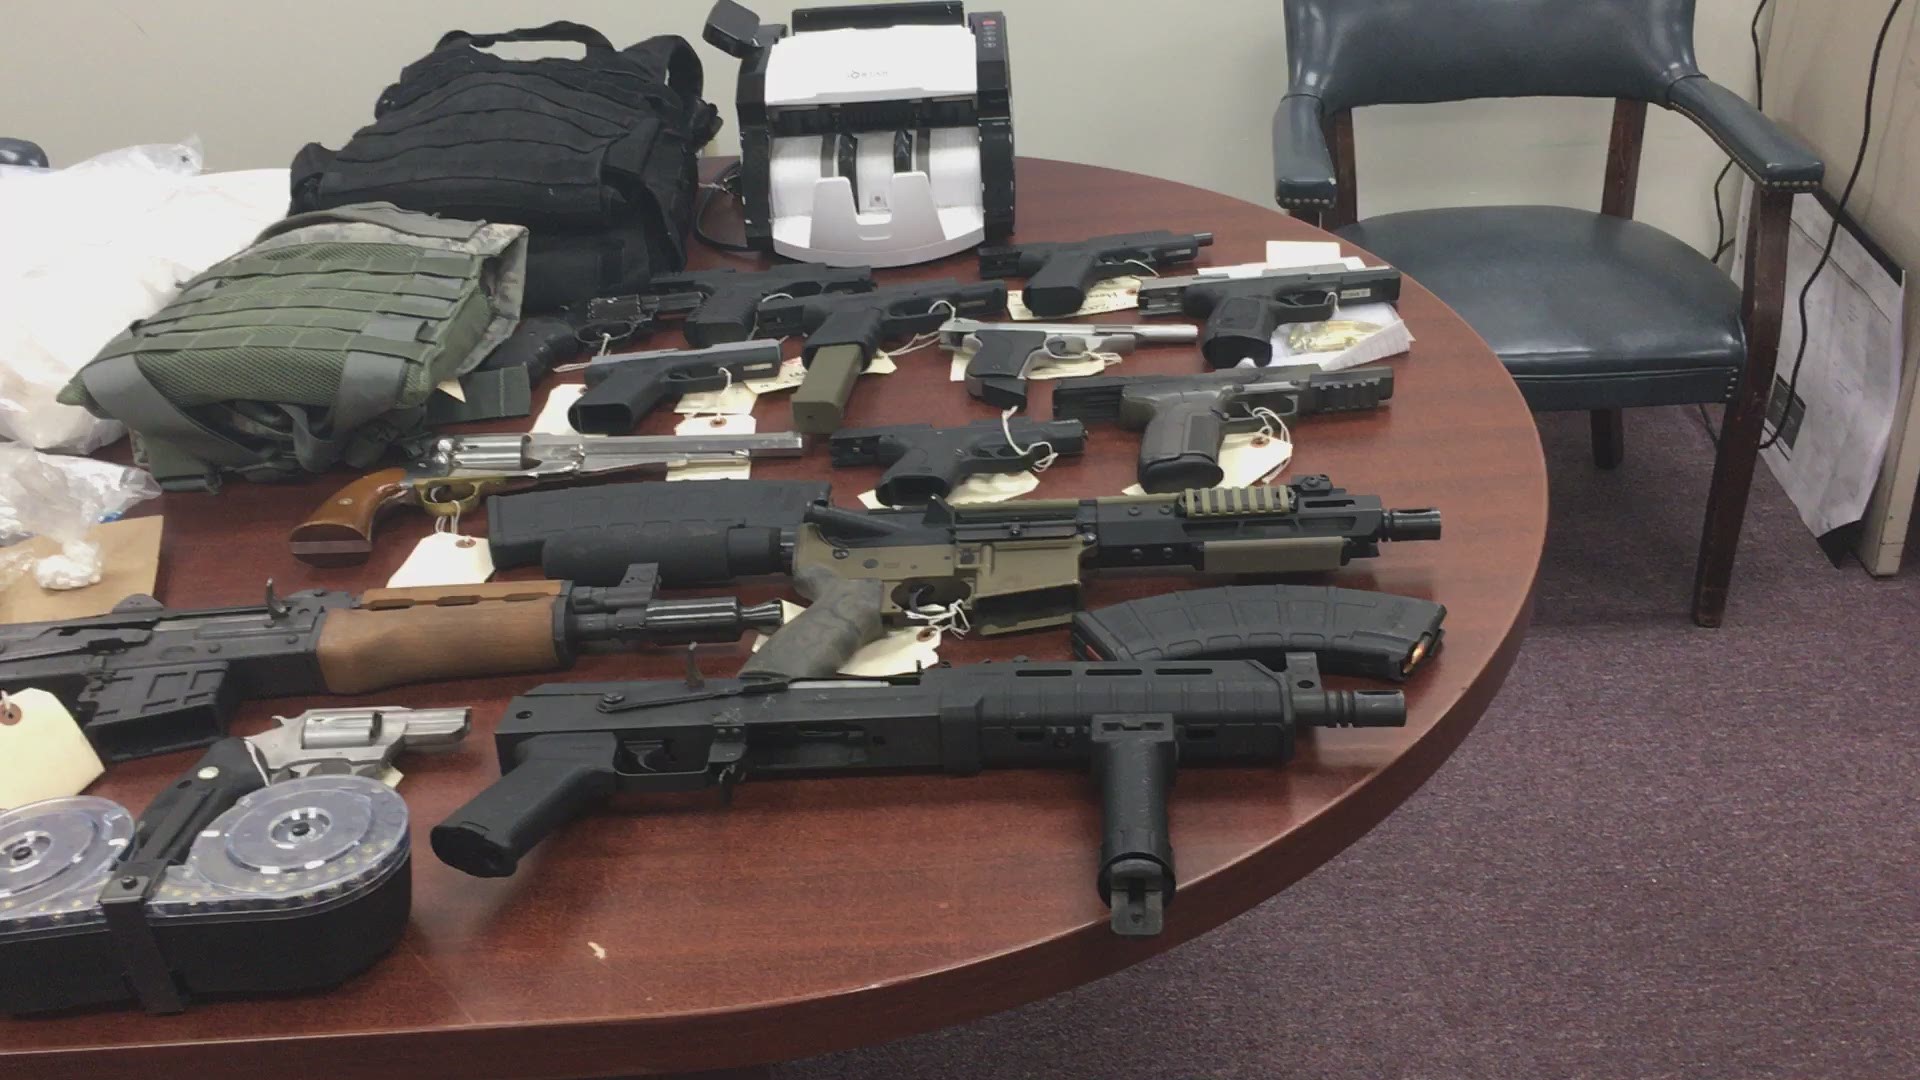 Investigators say Operation Lone Ranger started in June 2019 when they began looking into the sale of narcotics in Jones County